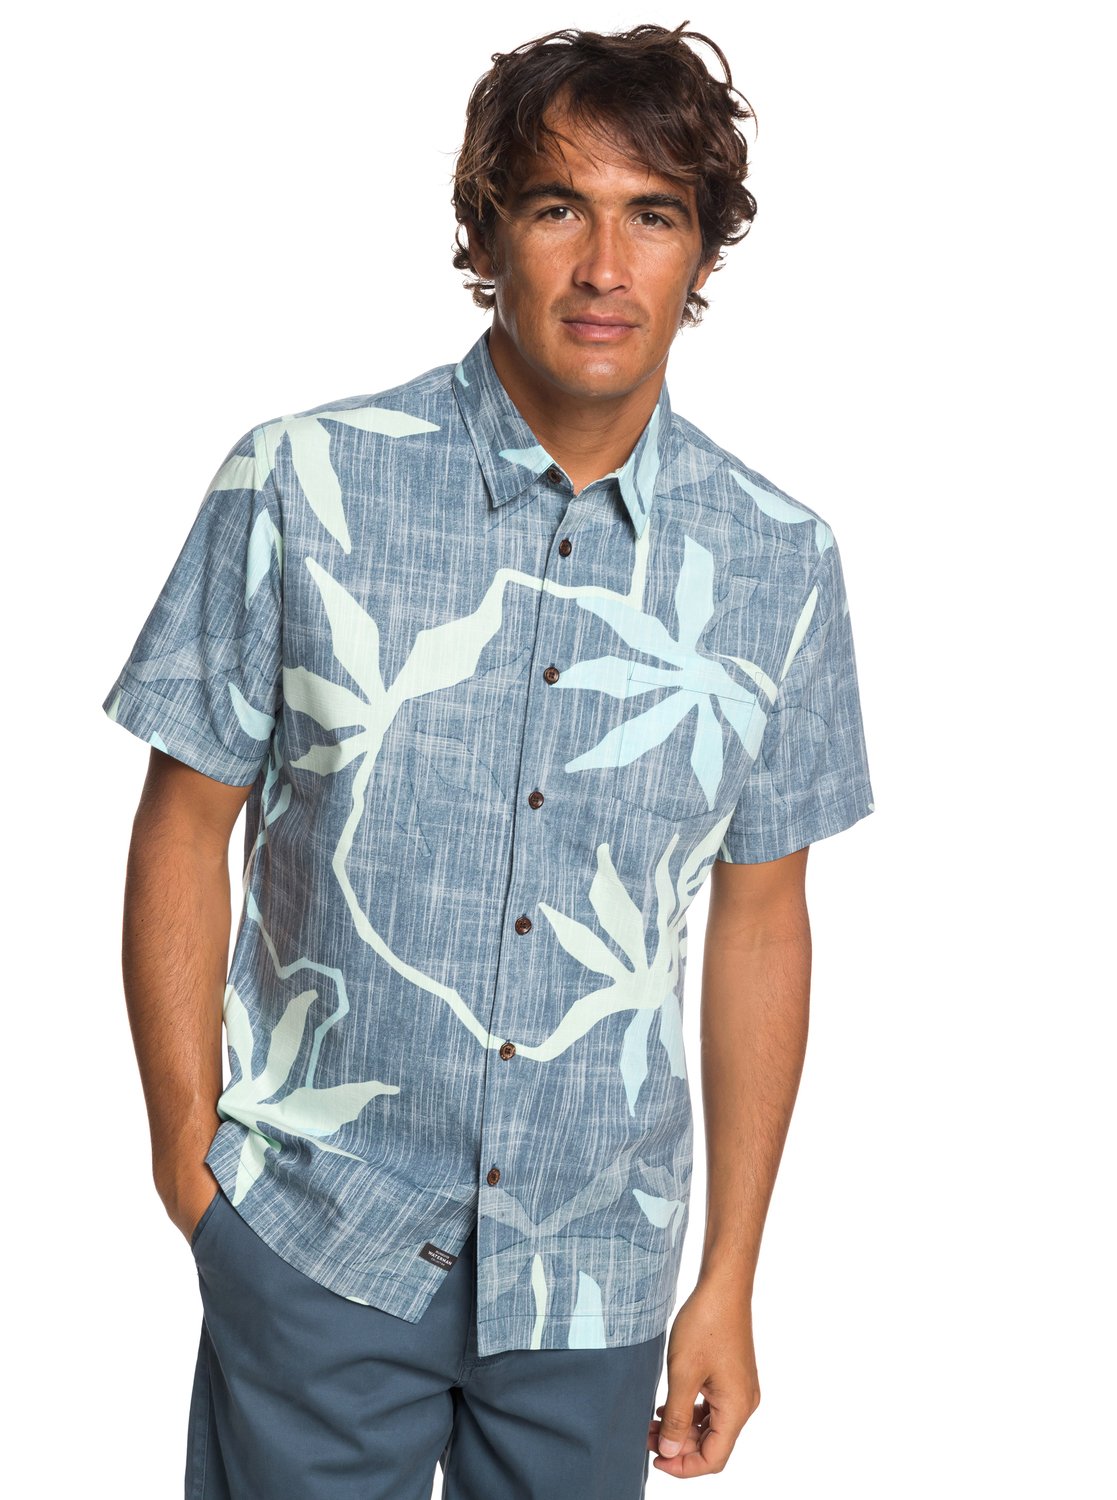 Quiksilver Waterman Gully Floral Woven BRG0 S